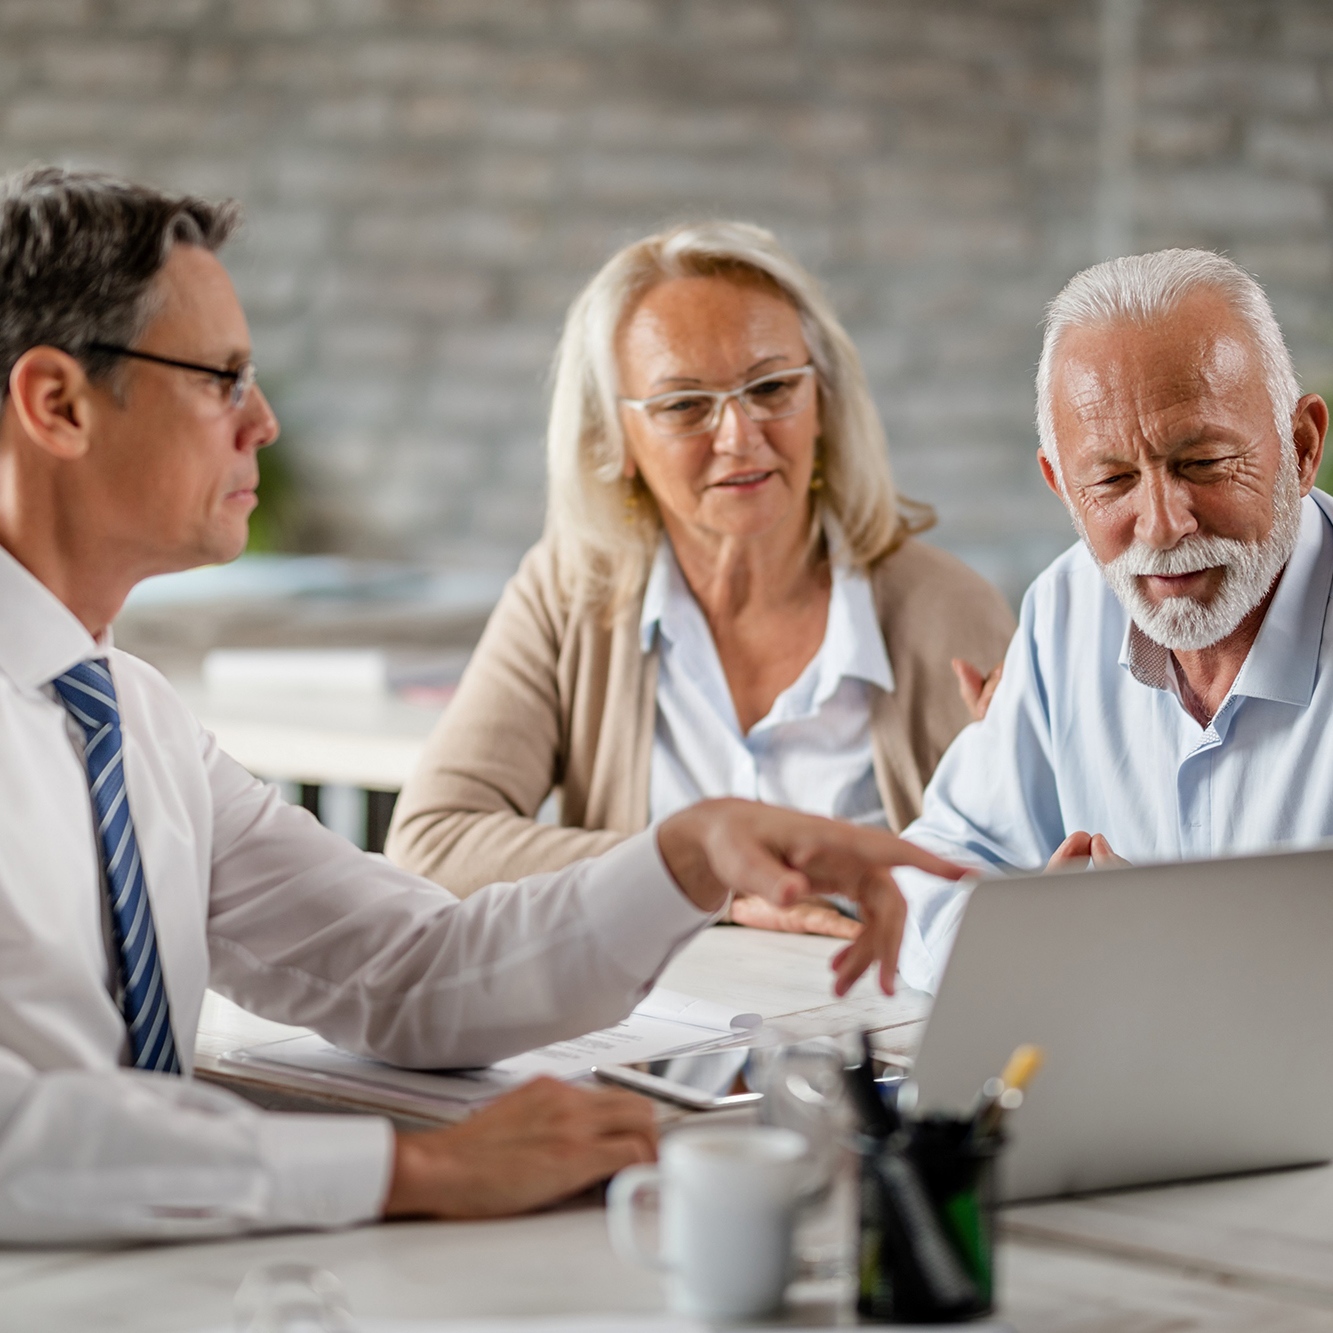 3 financial moves not to make during covid - big changes to retirement accounts